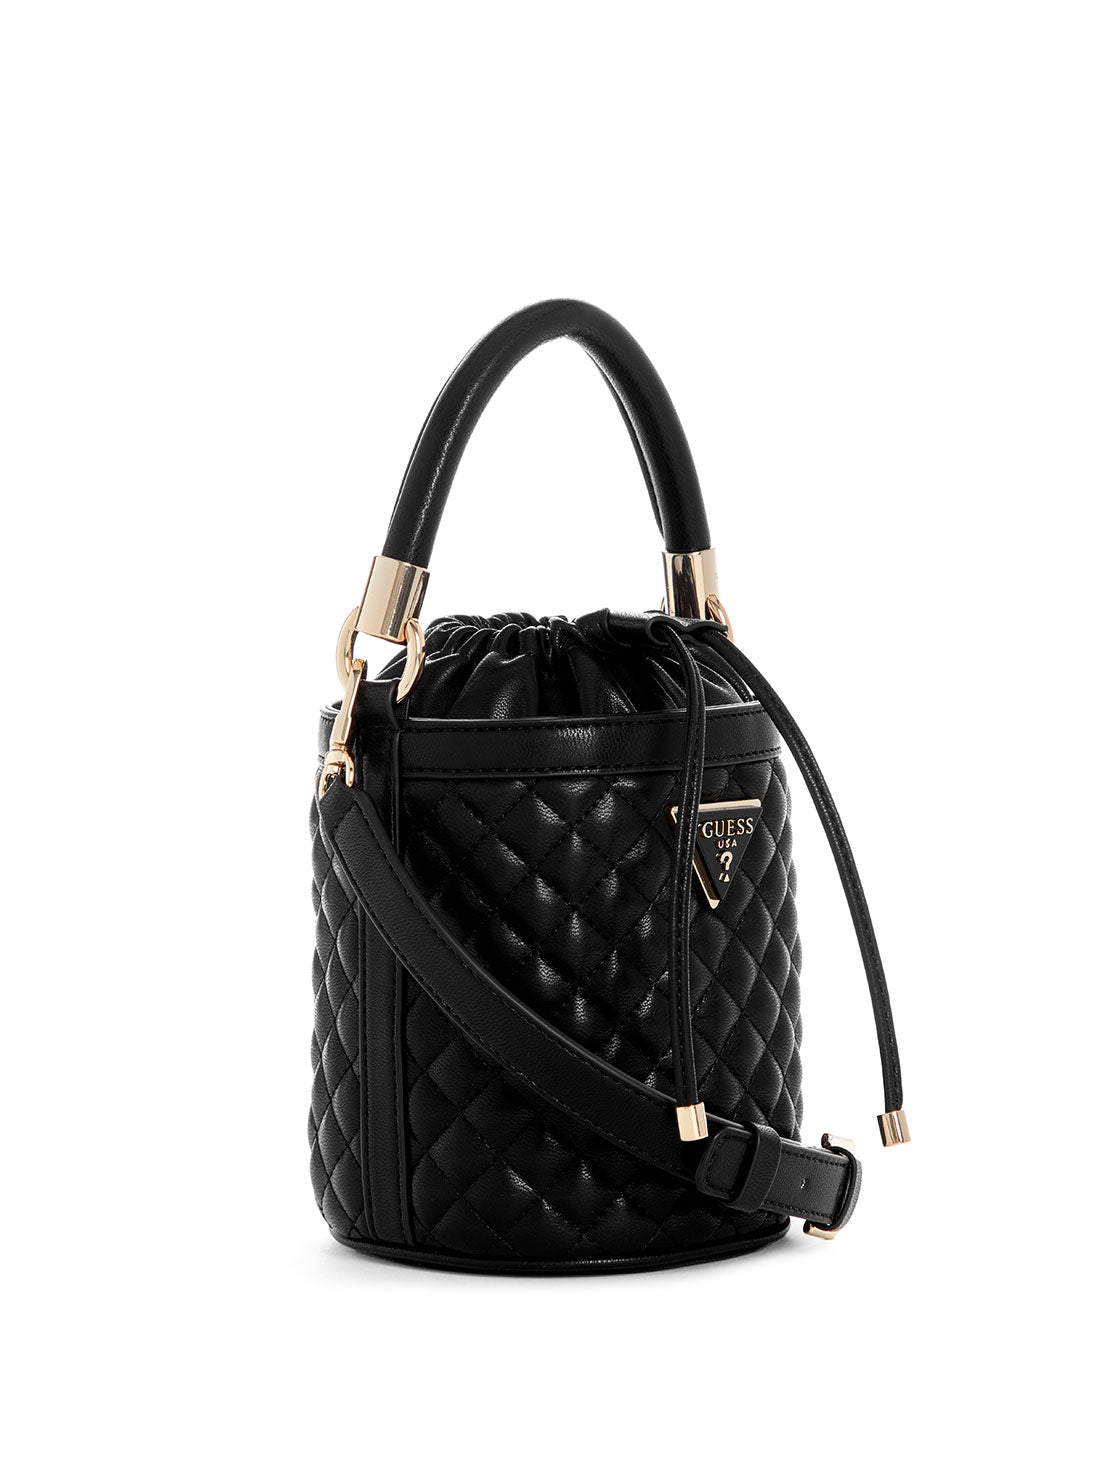 Buy Exquisite Range Of Guess Mini Bags Online At Great Deals